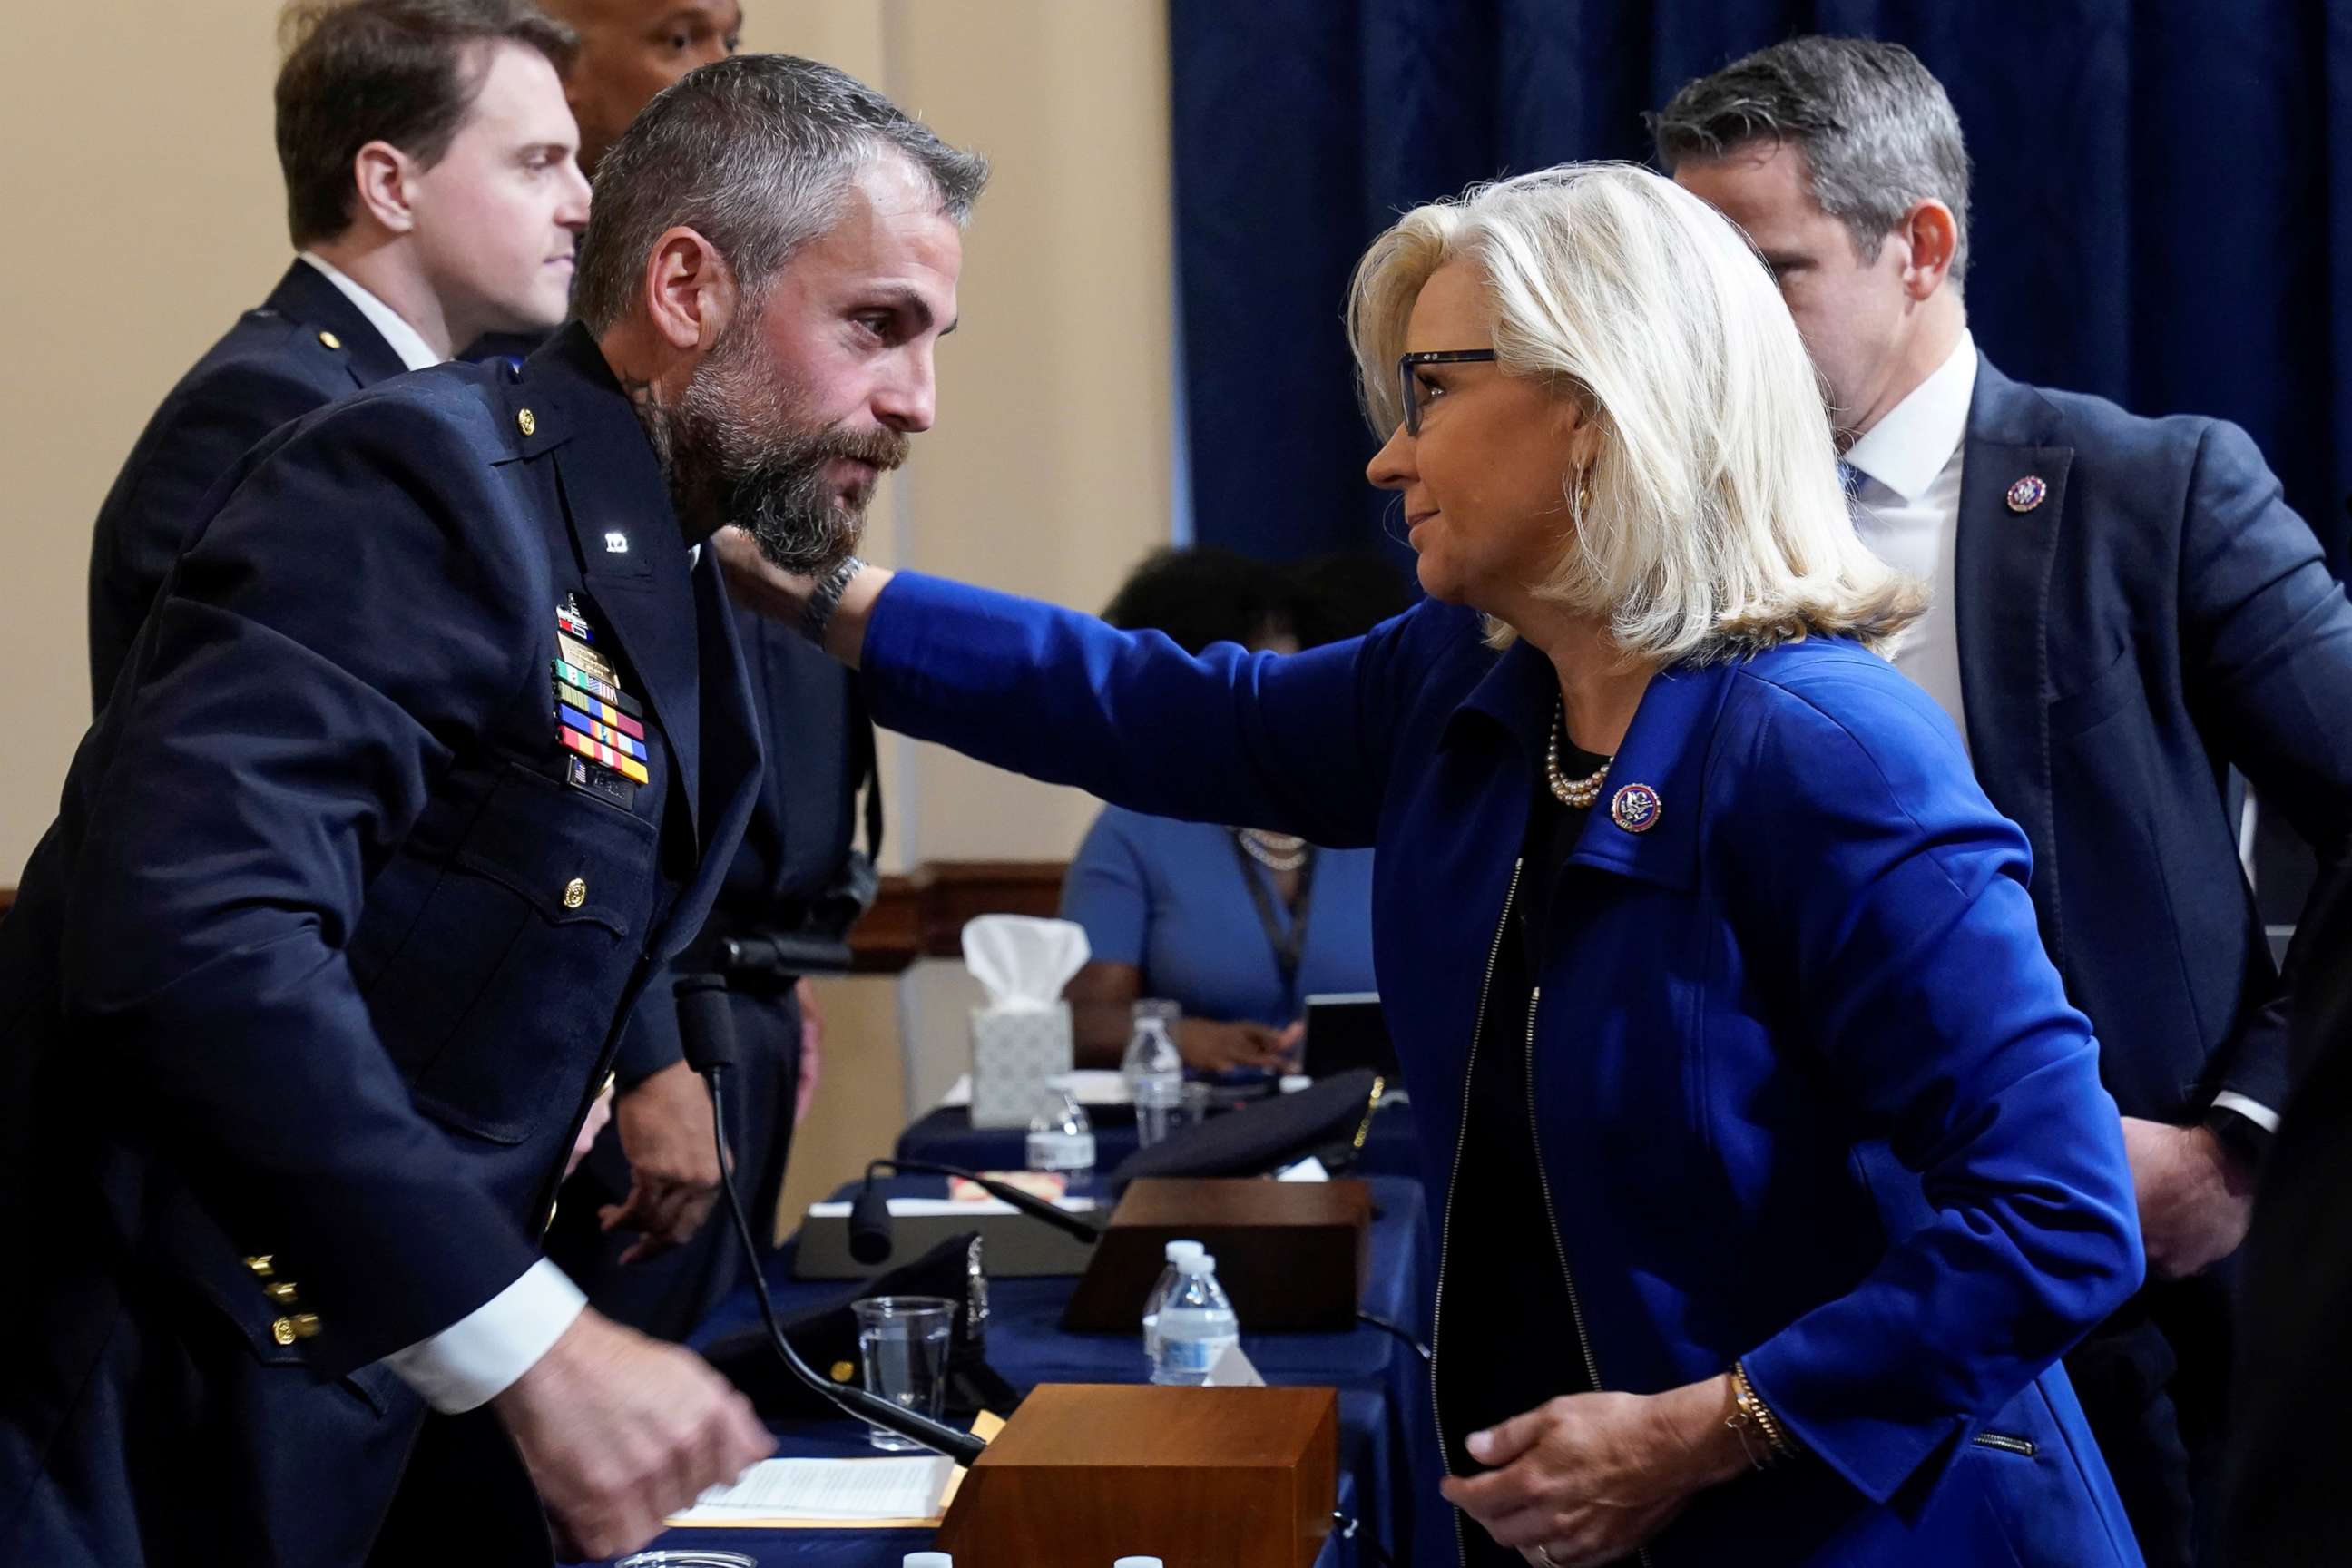 PHOTO: Rep. Liz Cheney greets Washington Metropolitan Police Department officer Michael Fanone before the first House select committee hearing on the Jan. 6 attack on Capitol Hill in Washington, D.C., July 27, 2021.